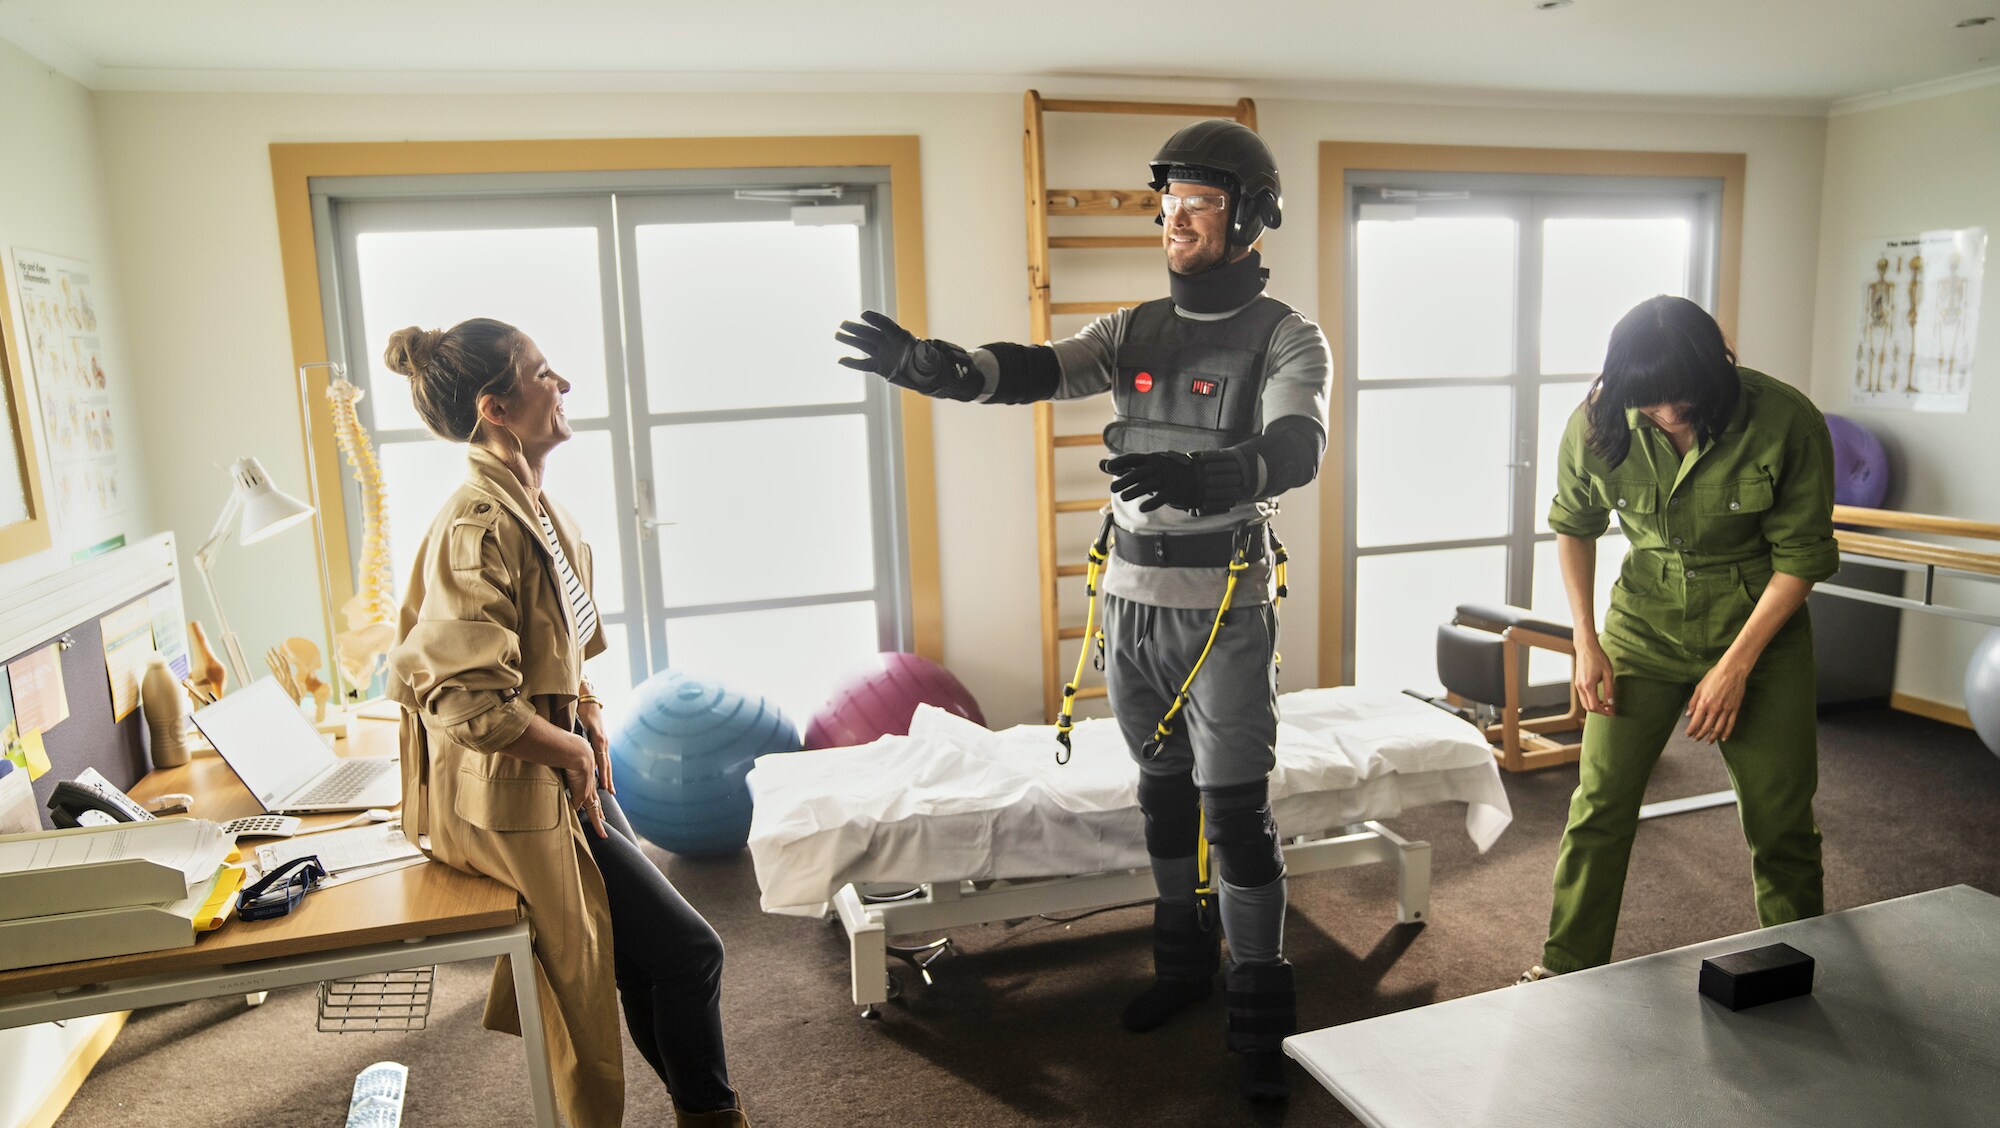 Chris Hemsworth tries on an age simulation suit with his wife, Elsa. (National Geographic for Disney+/Craig Parry)